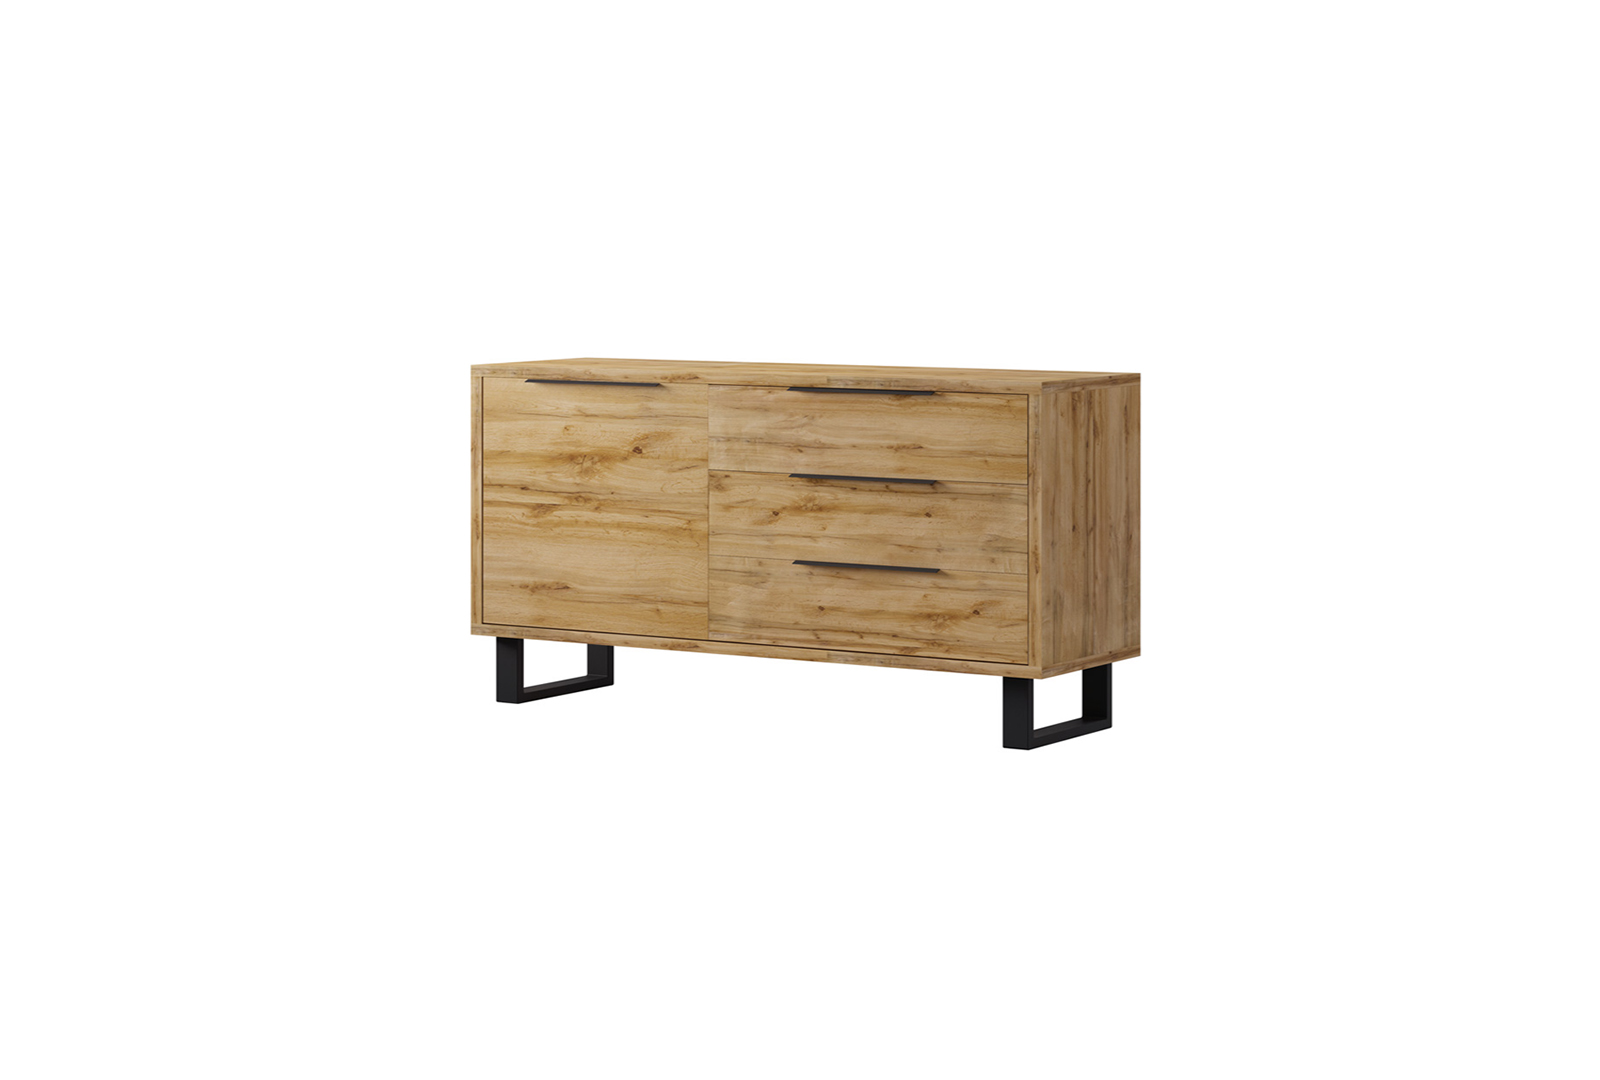 HALLE CHEST OF DRAWERS TYPE 47